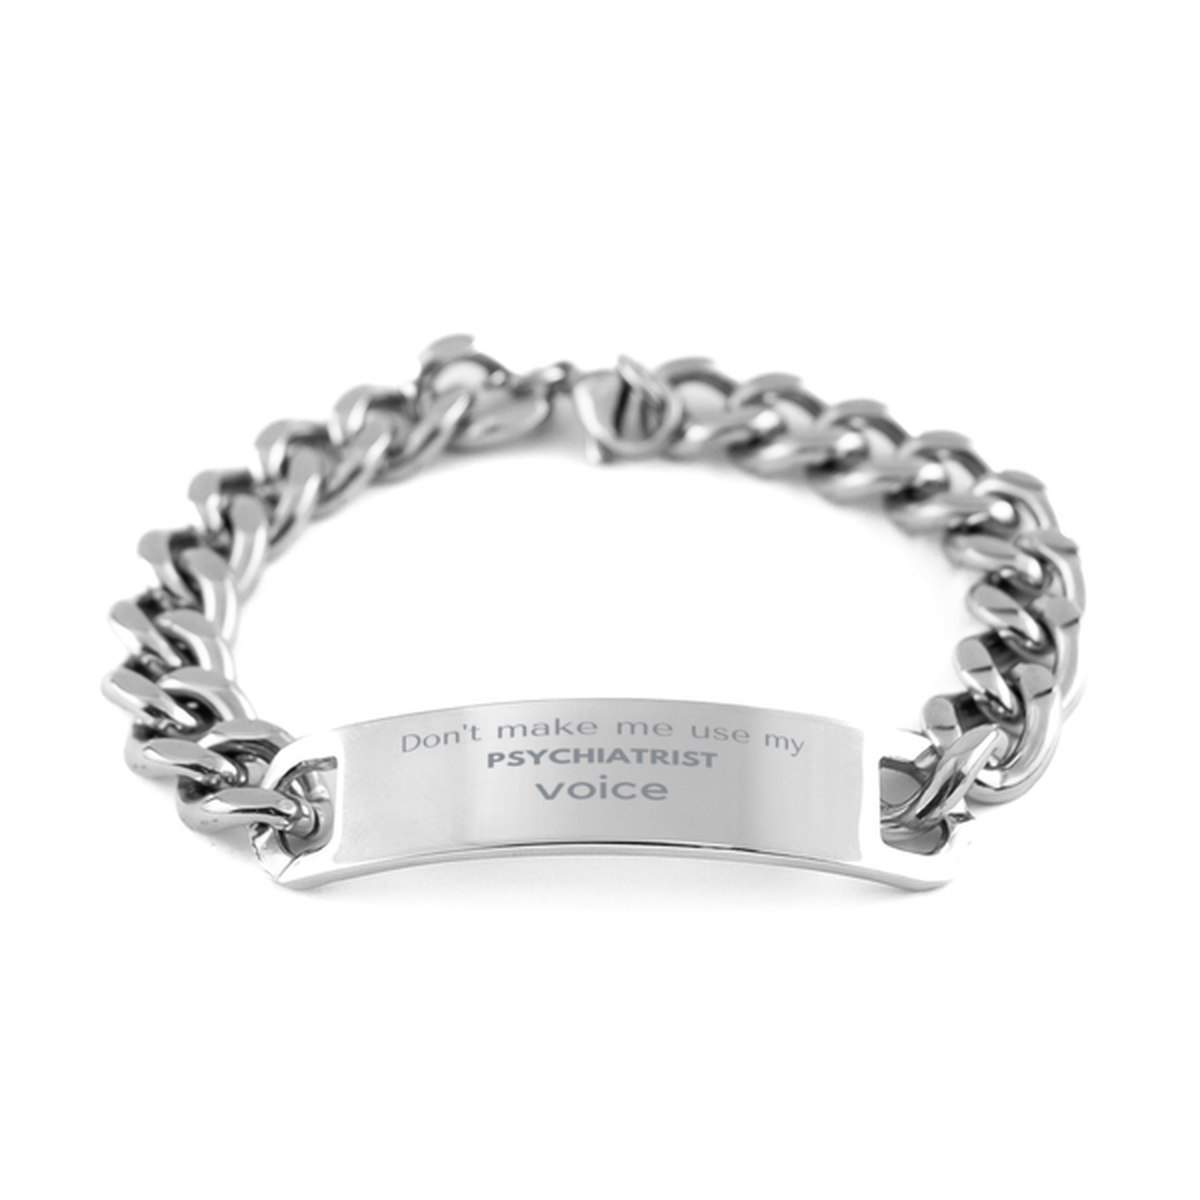 Don't make me use my Psychiatrist voice, Sarcasm Psychiatrist Gifts, Christmas Psychiatrist Cuban Chain Stainless Steel Bracelet Birthday Unique Gifts For Psychiatrist Coworkers, Men, Women, Colleague, Friends